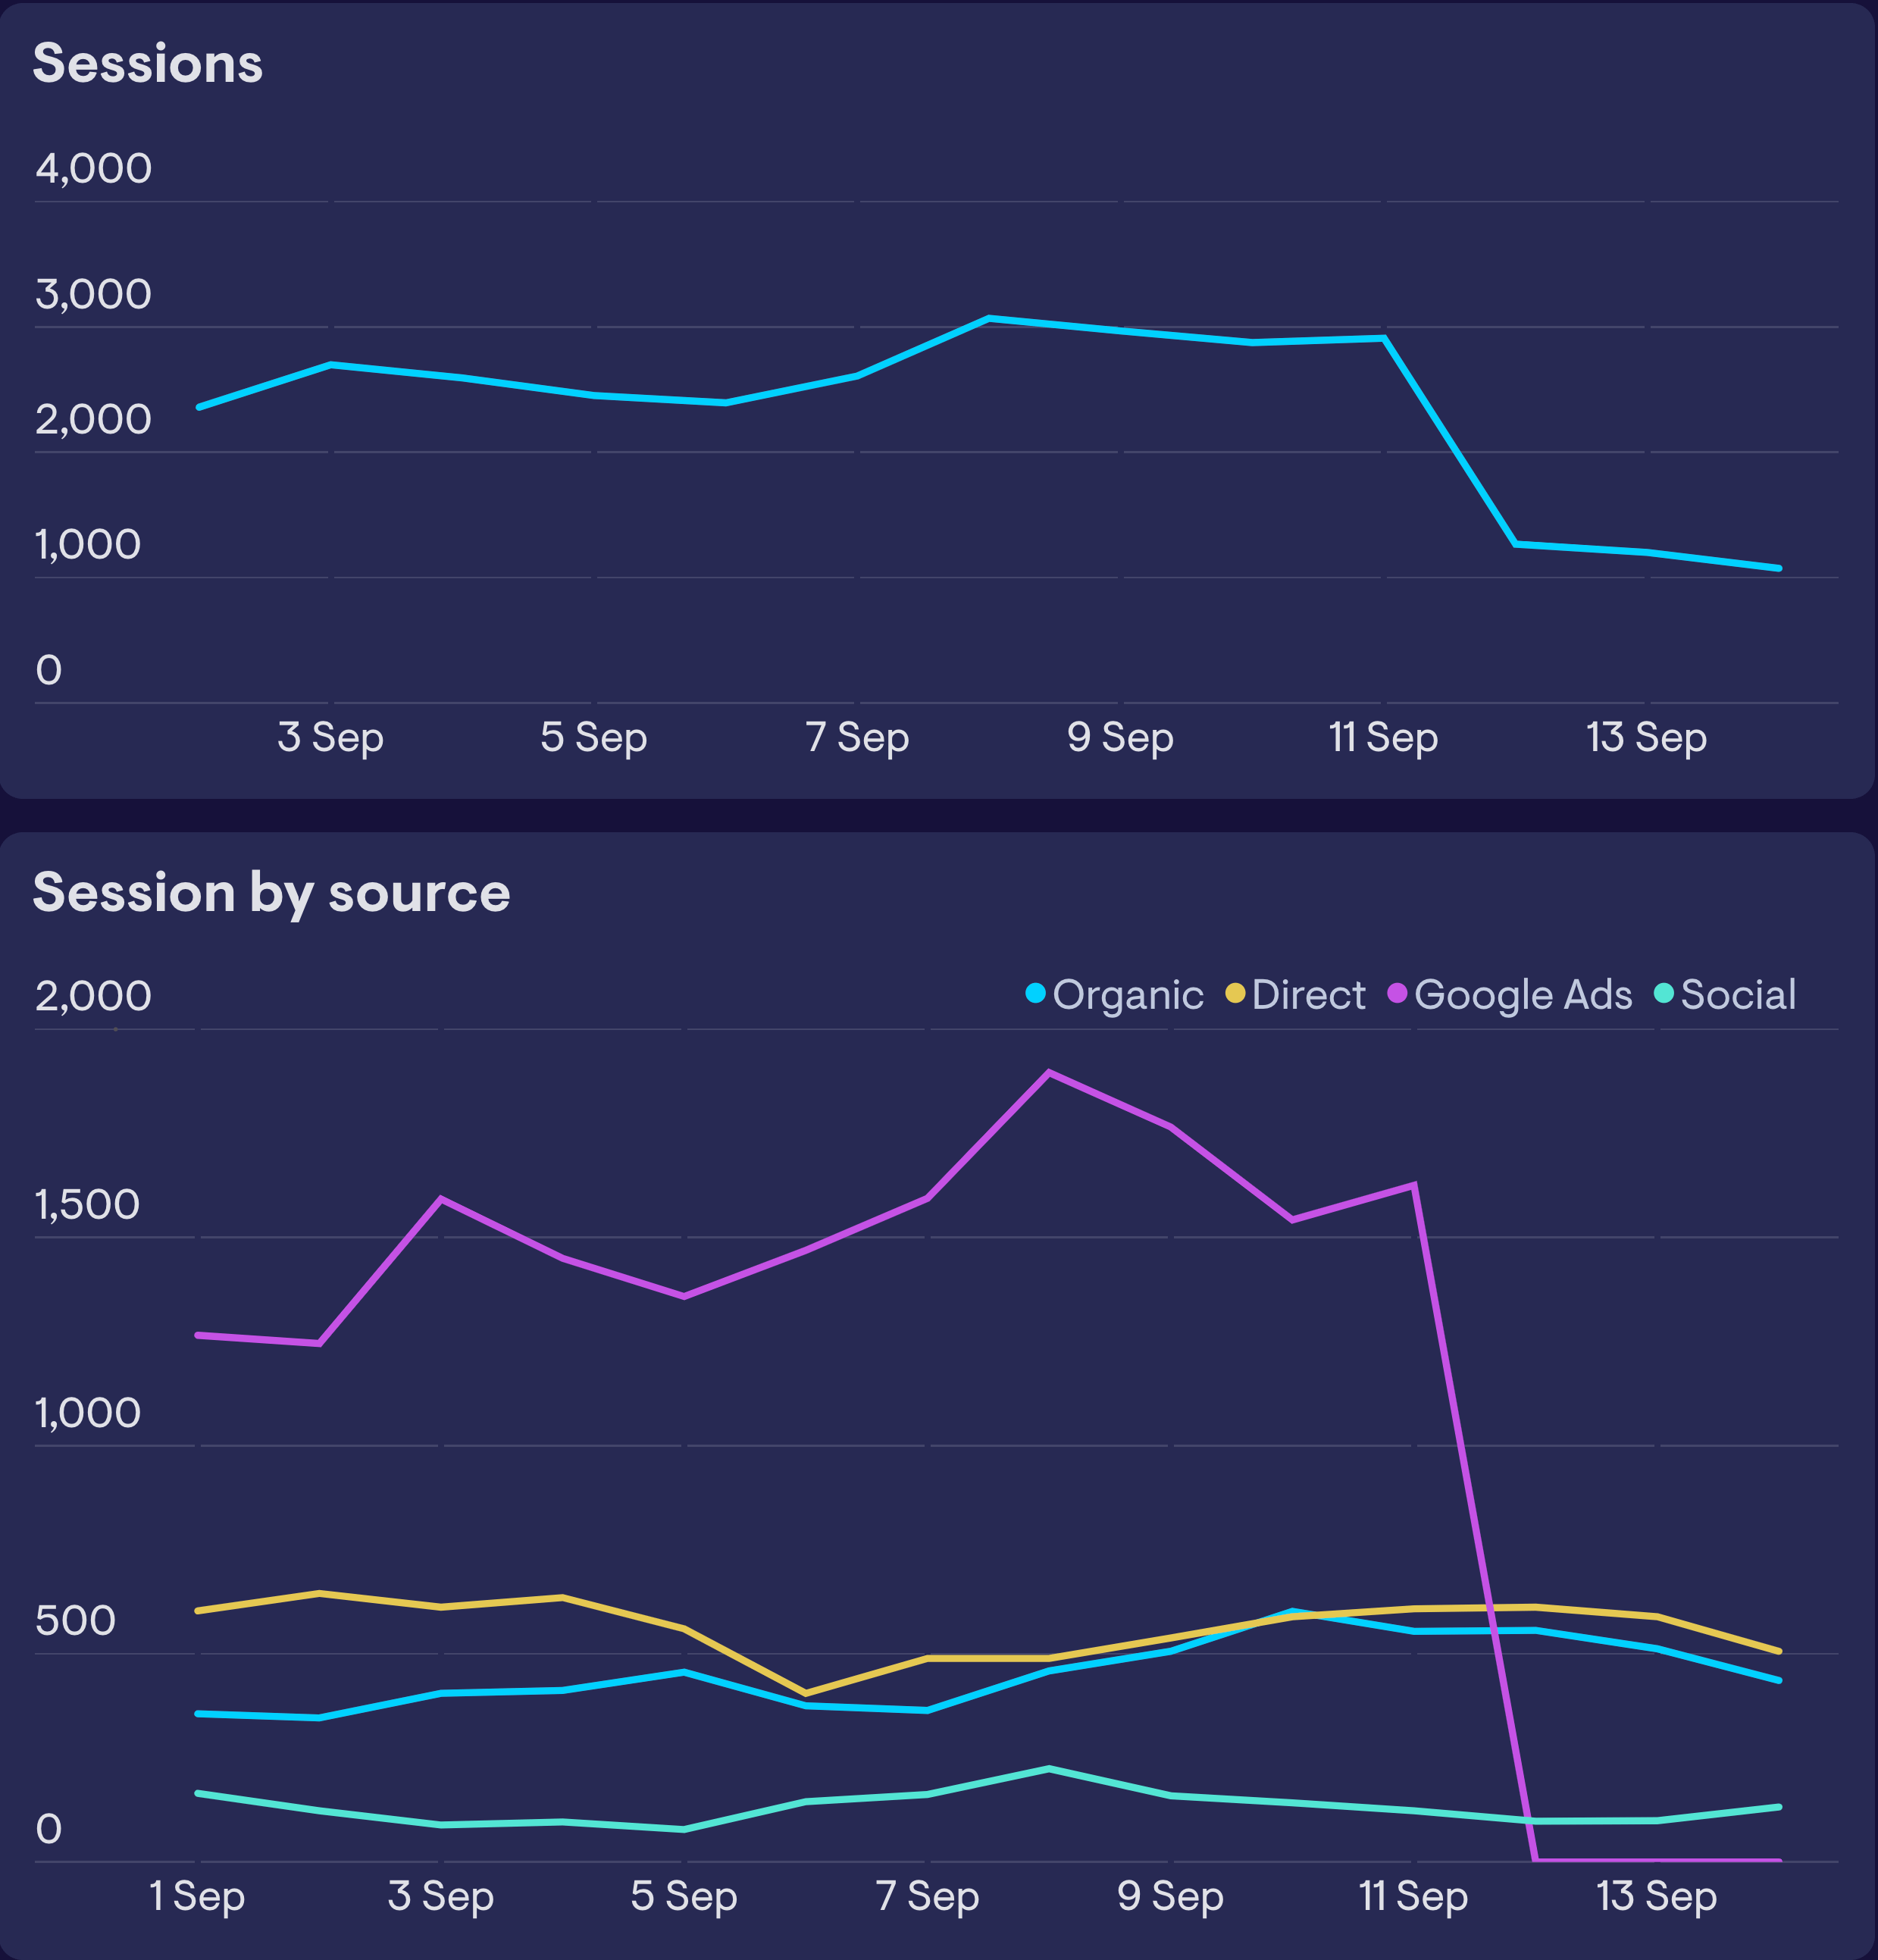 Two line charts: one is segmenting session data by source and shows a dip in Google Ads traffic.